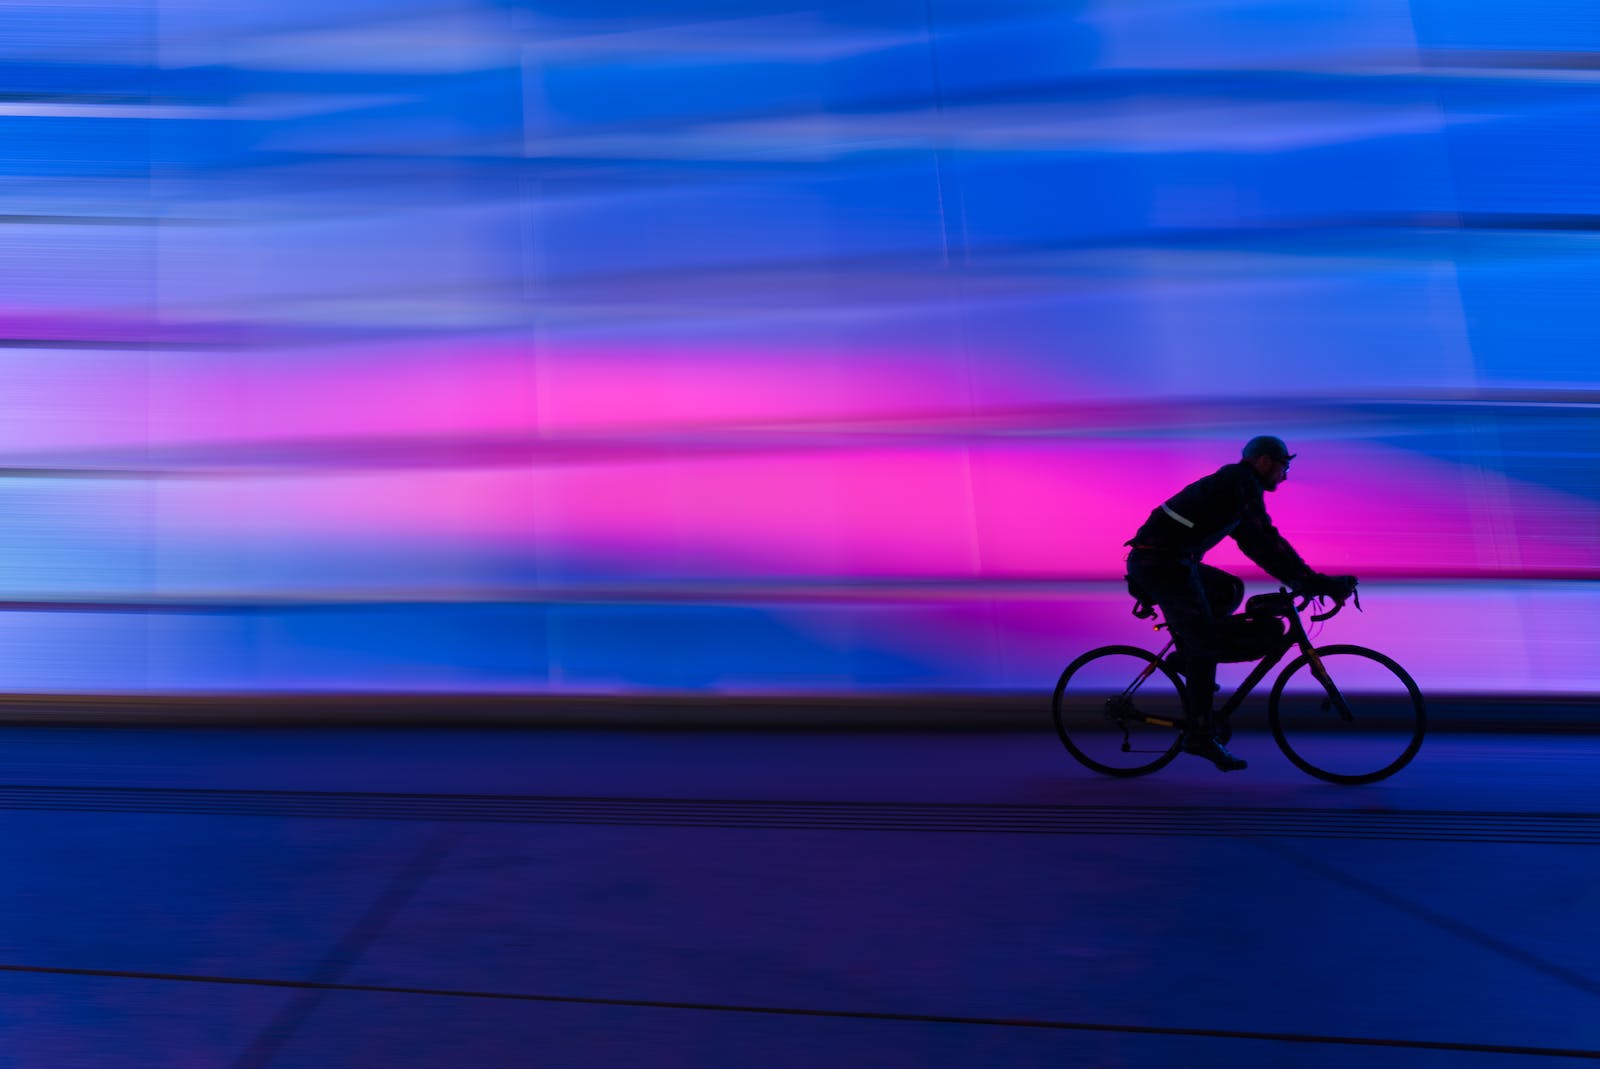 Silhouette of Person Riding on Commuter Bike